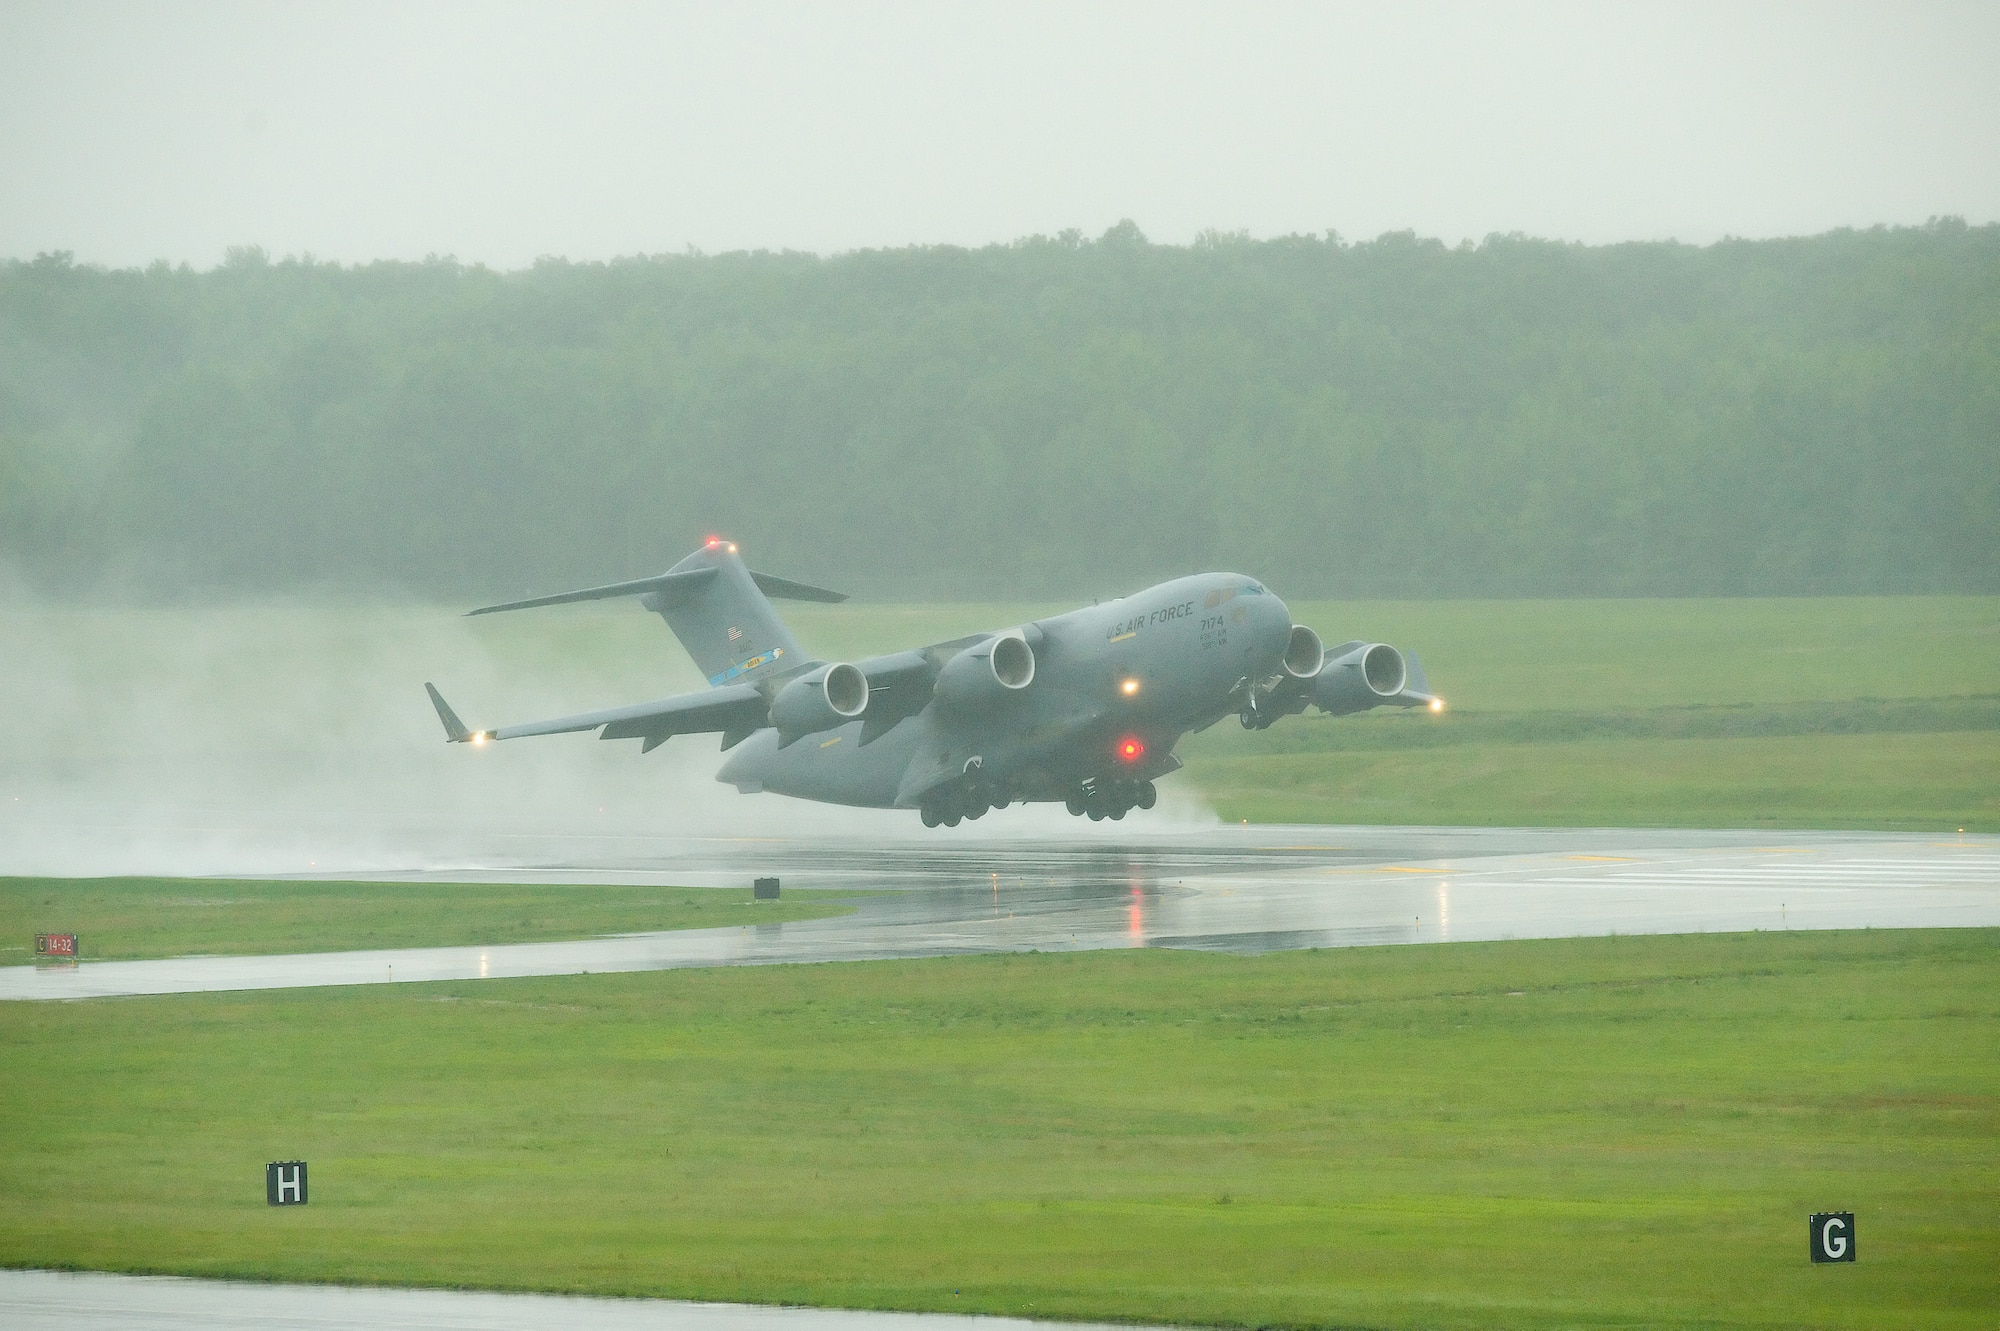 A C-17 Globemaster III, piloted by Col. Manson Morris, 436th Airlift Wing commander, takes off from runway 14/32 at Dover Air Force Base, Del., June 5. Colonel Morris flew the first aircraft to utilize the newly reconstructed runway, a 17-month project. (U.S. Air Force photo/Jason Minto)